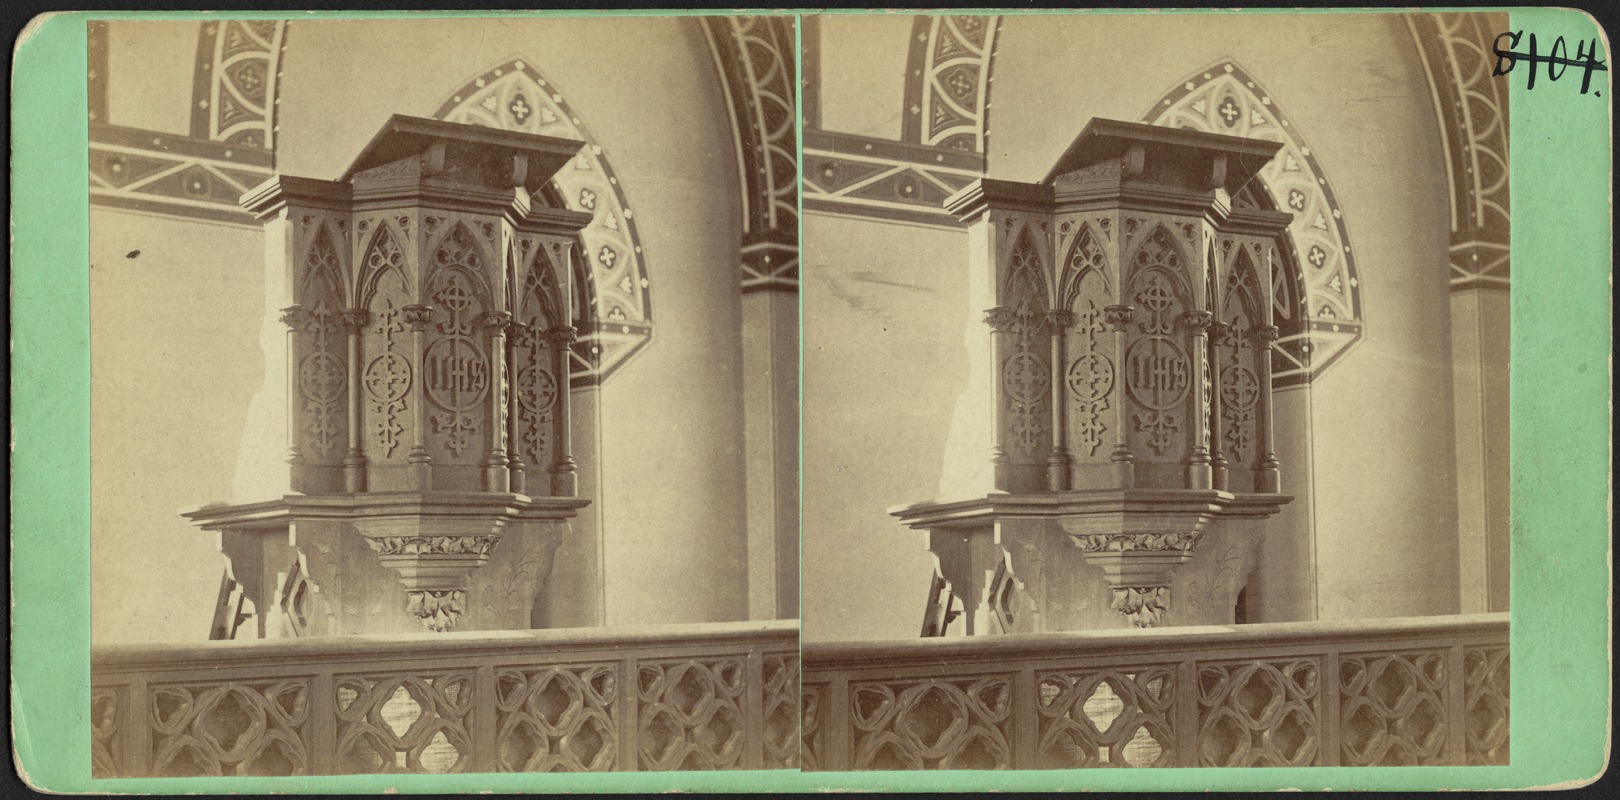 Pulpit of St. Lawrence Church, New Bedford, MA